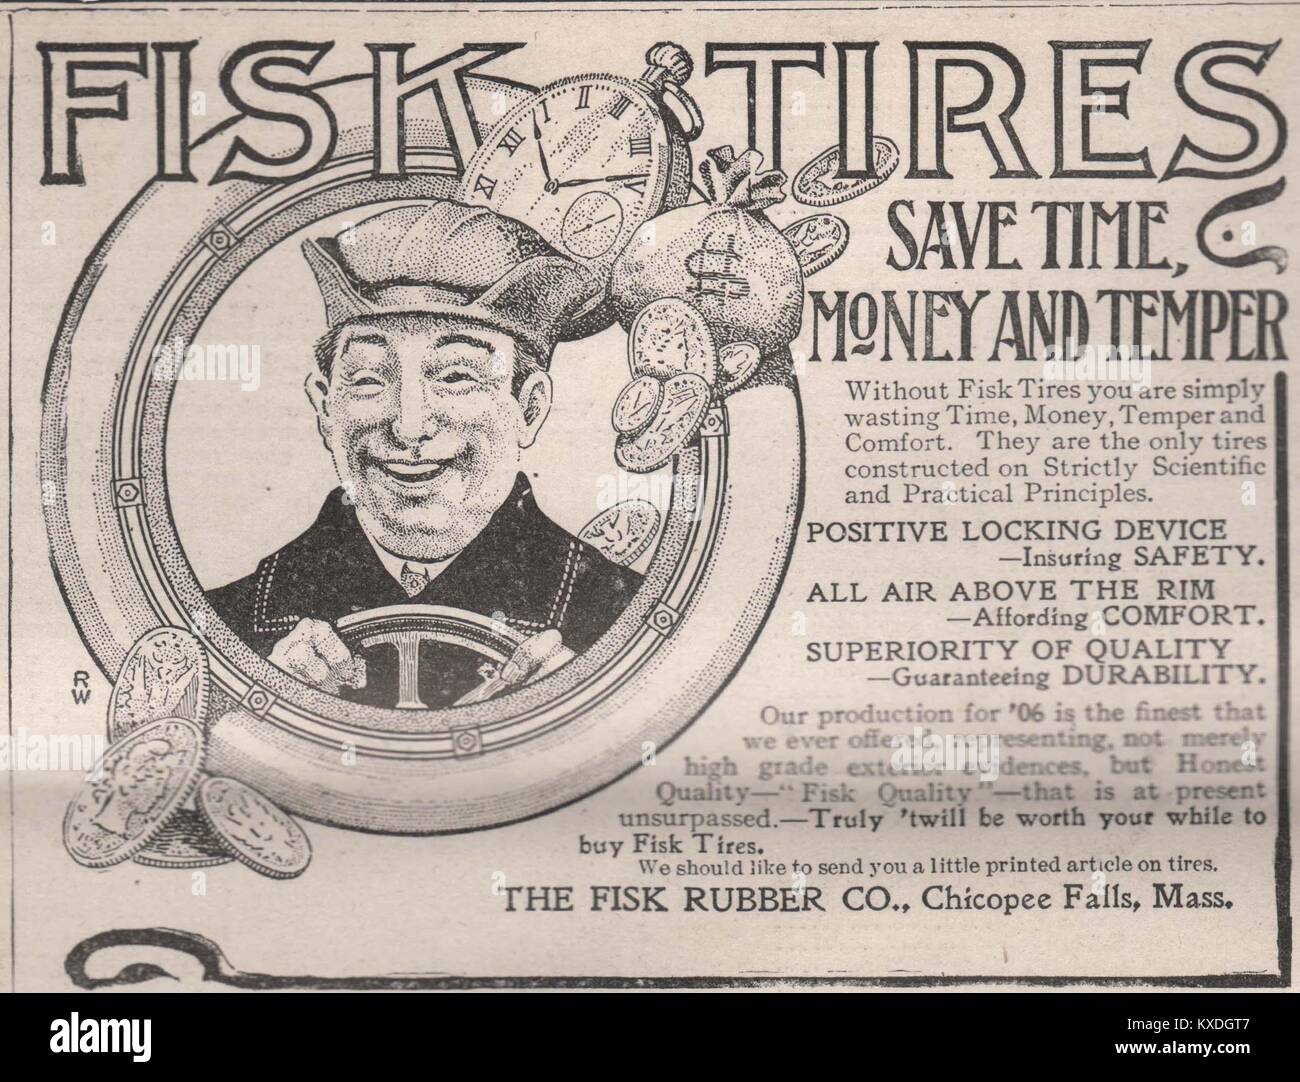 'Fisk Tires save time, Money and Temper' - The Fisk Rubber Co., Chicopee Falls, Mass Stock Photo